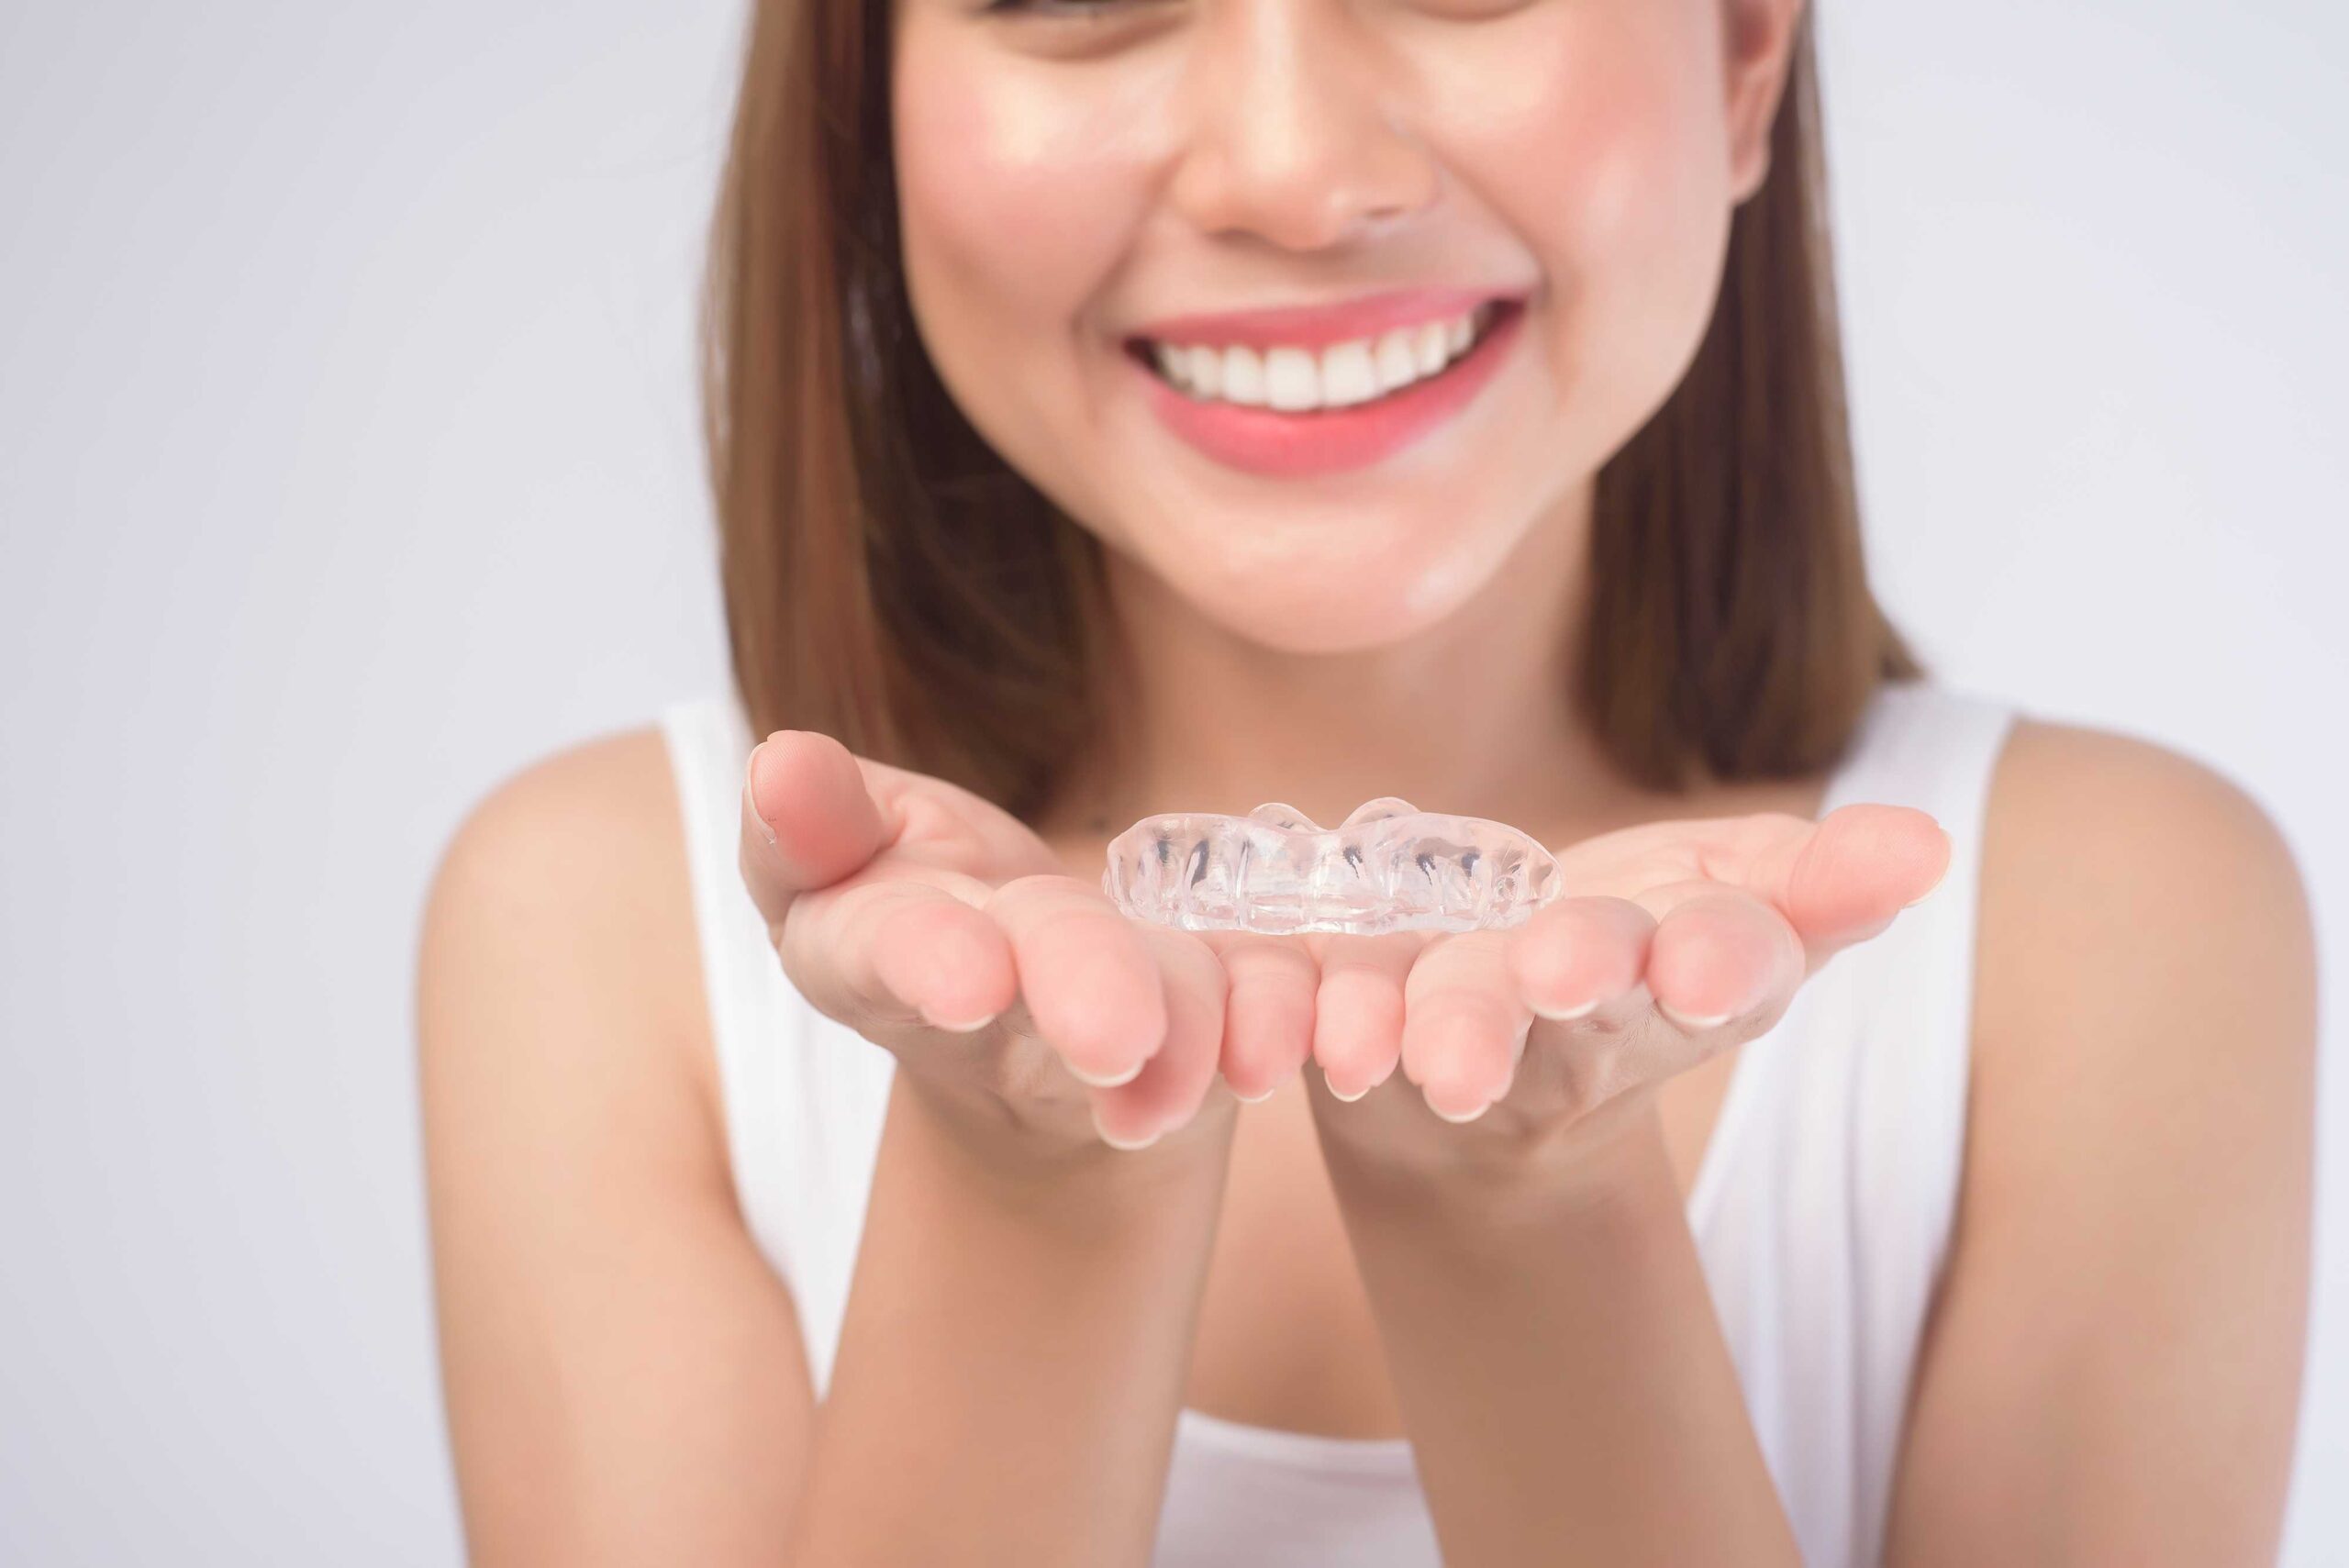 Achieving Harmony Invisalign and Your Oral Health